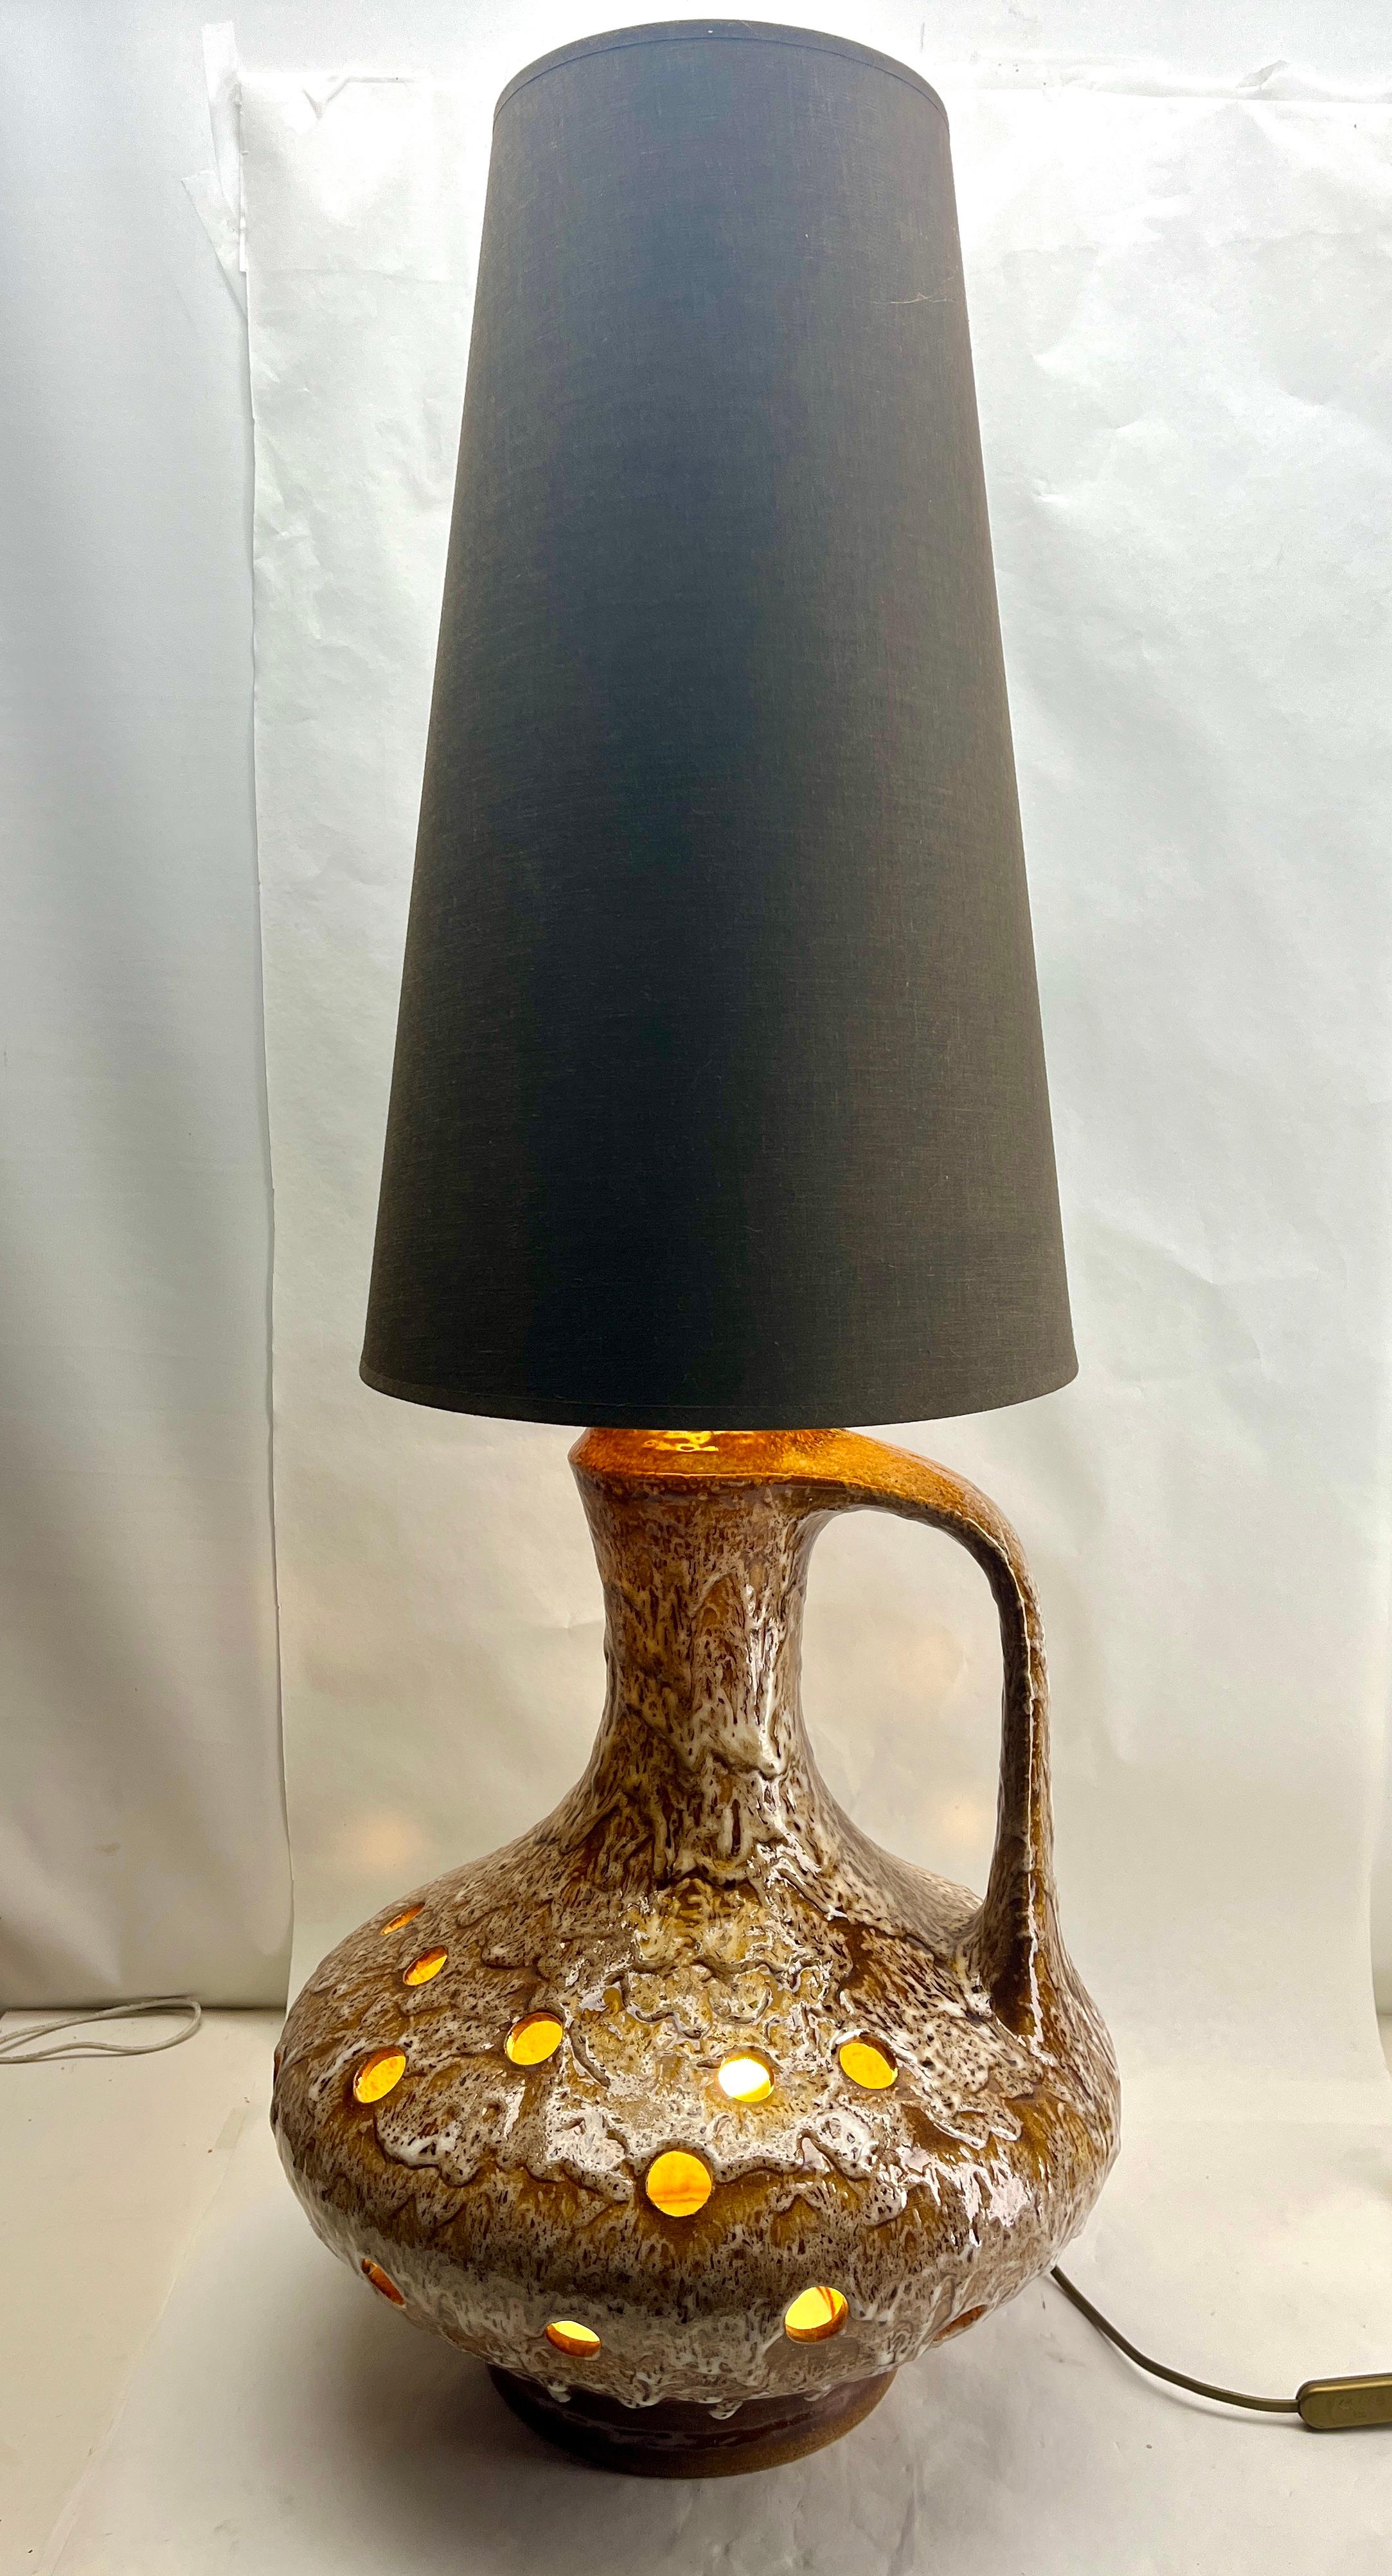 Hand-Crafted Vintage Fat Lava Floor Lamp Brown tones and white Drip-Glazes by Walter Gerhards